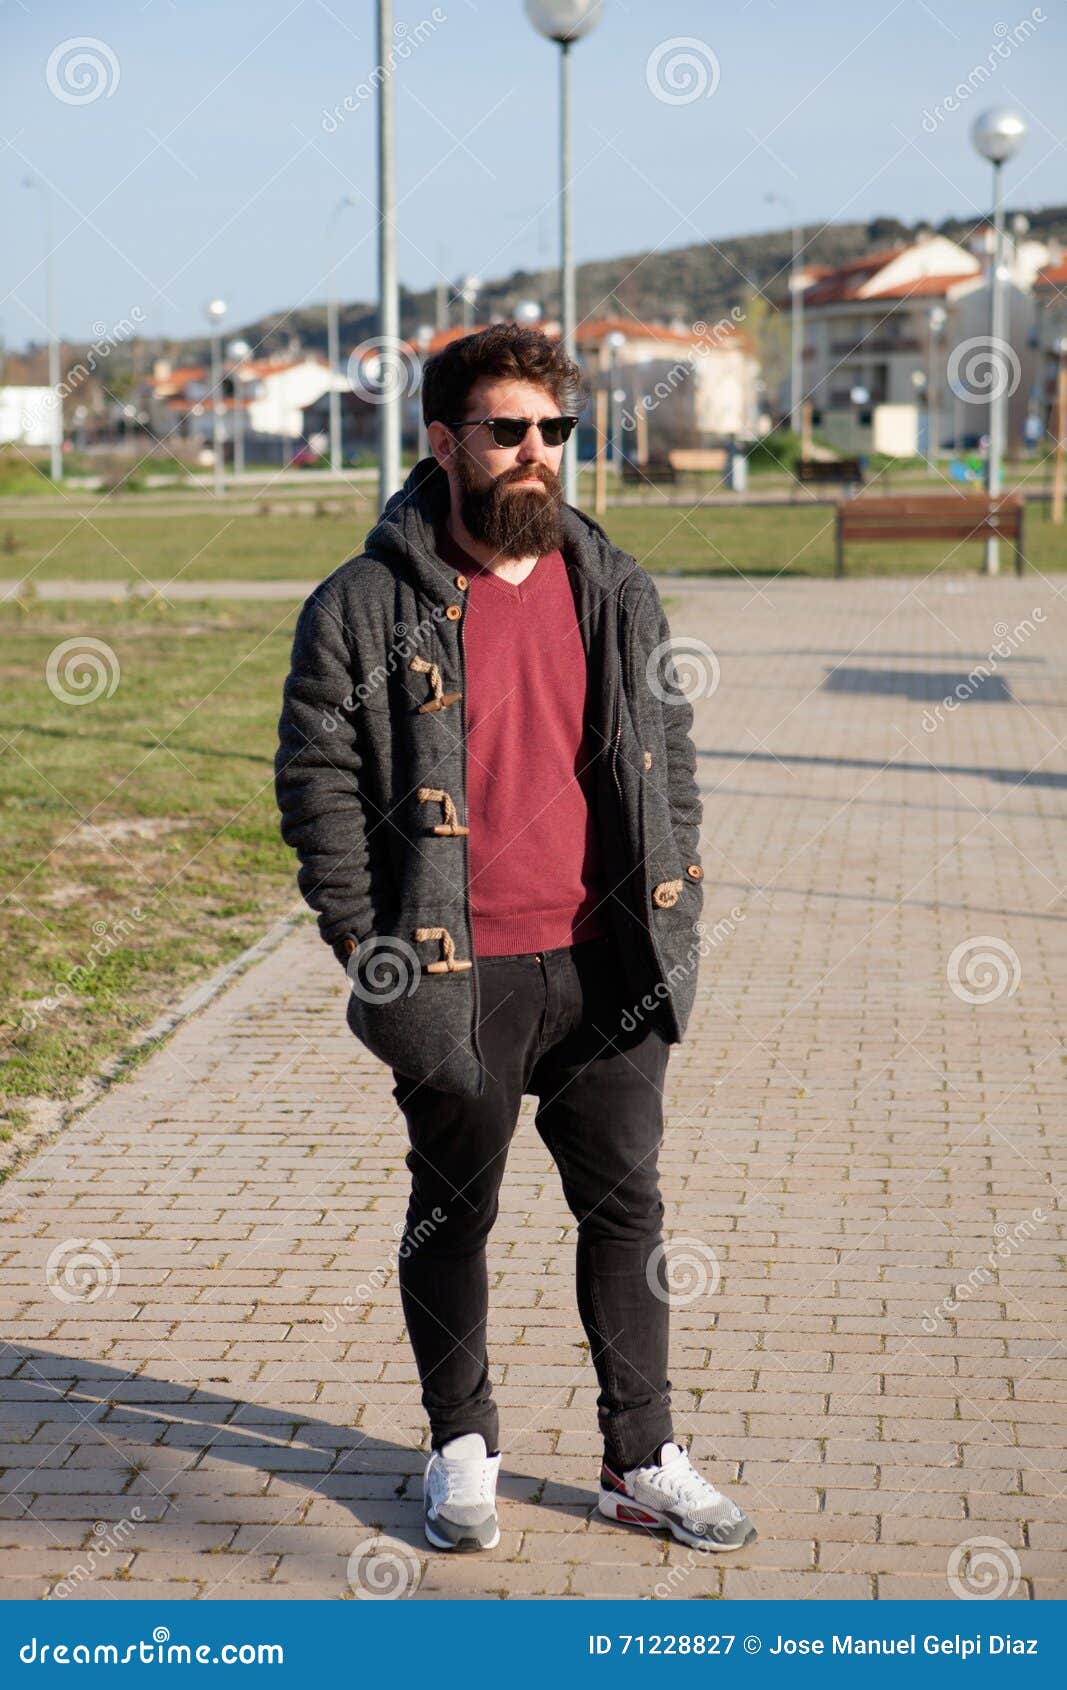 Young Men with Hipster Look Stock Image - Image of expressing, portrait ...